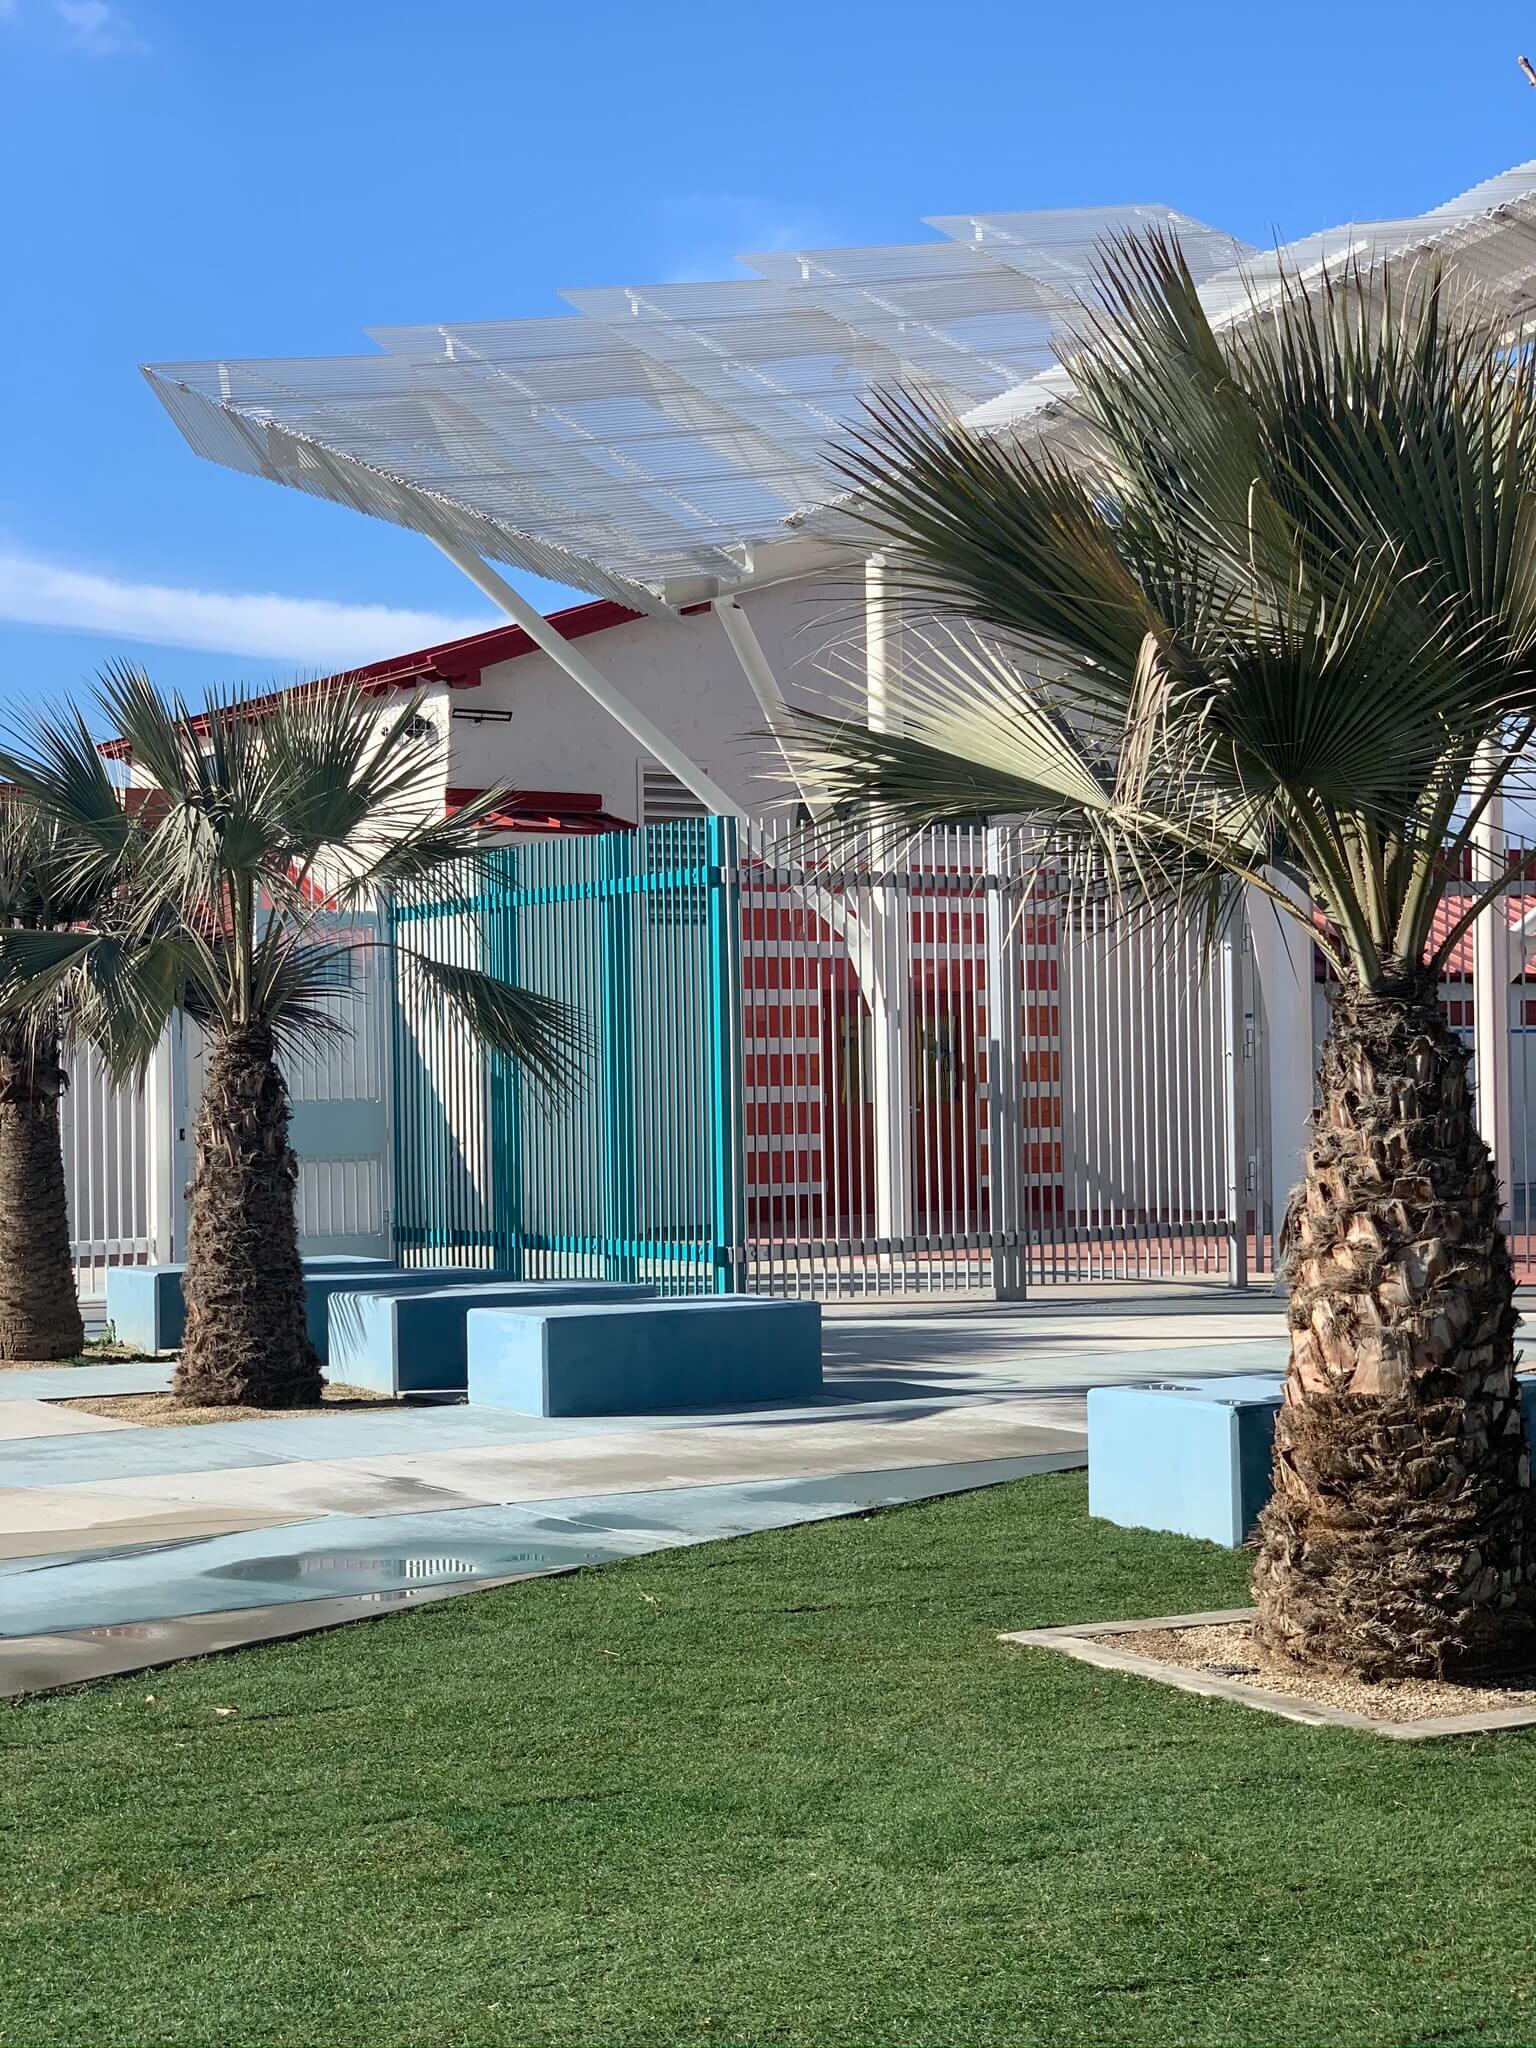 grass, palm trees, and a shade structure at a colorful recreational complex at the algin sutton pool